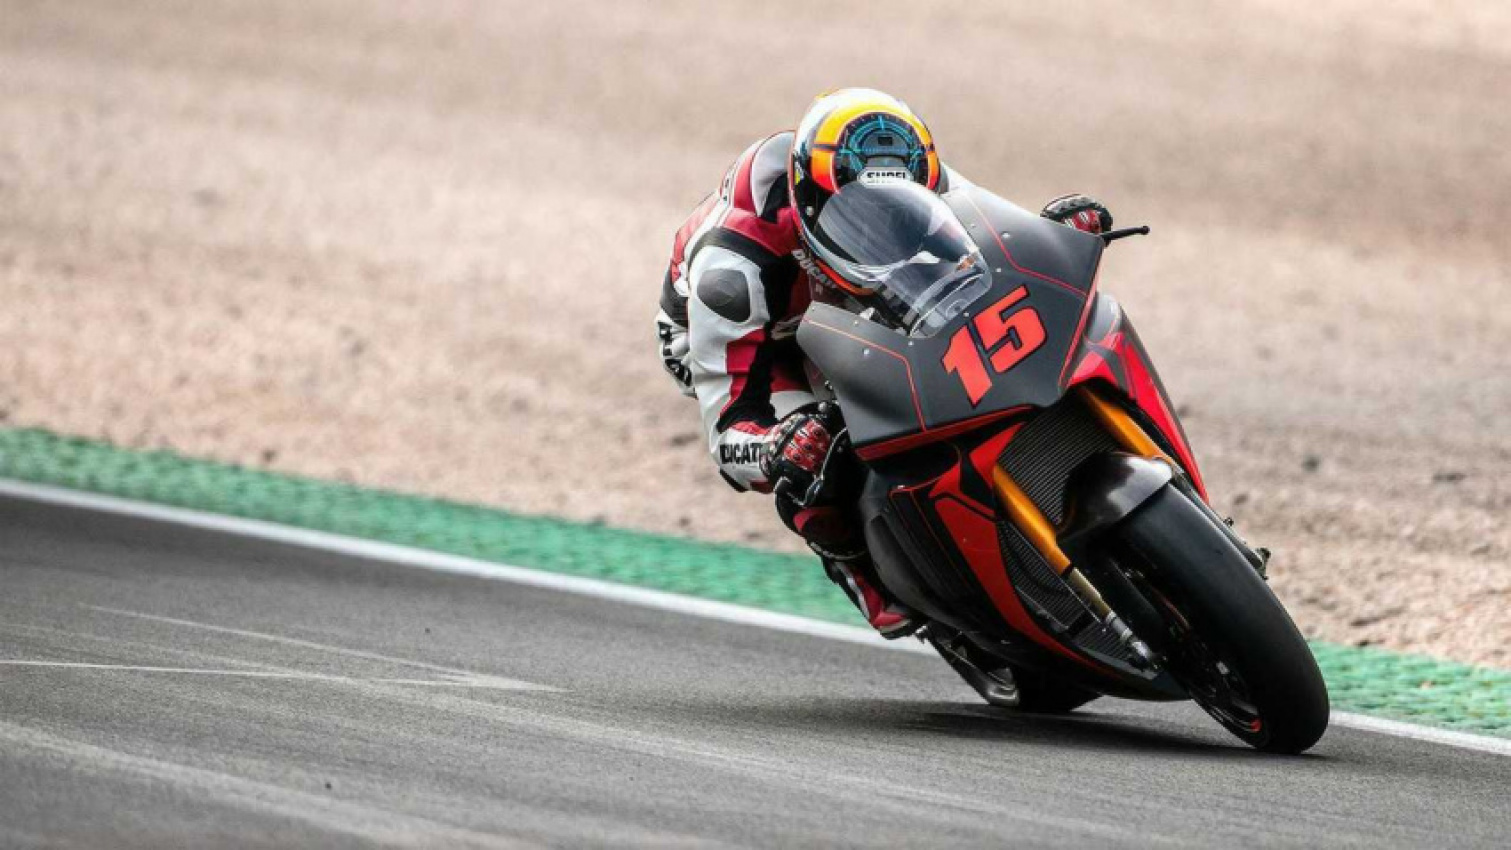 autos, cars, ducati, ducati v21l motoe electric prototype out testing on track in italy